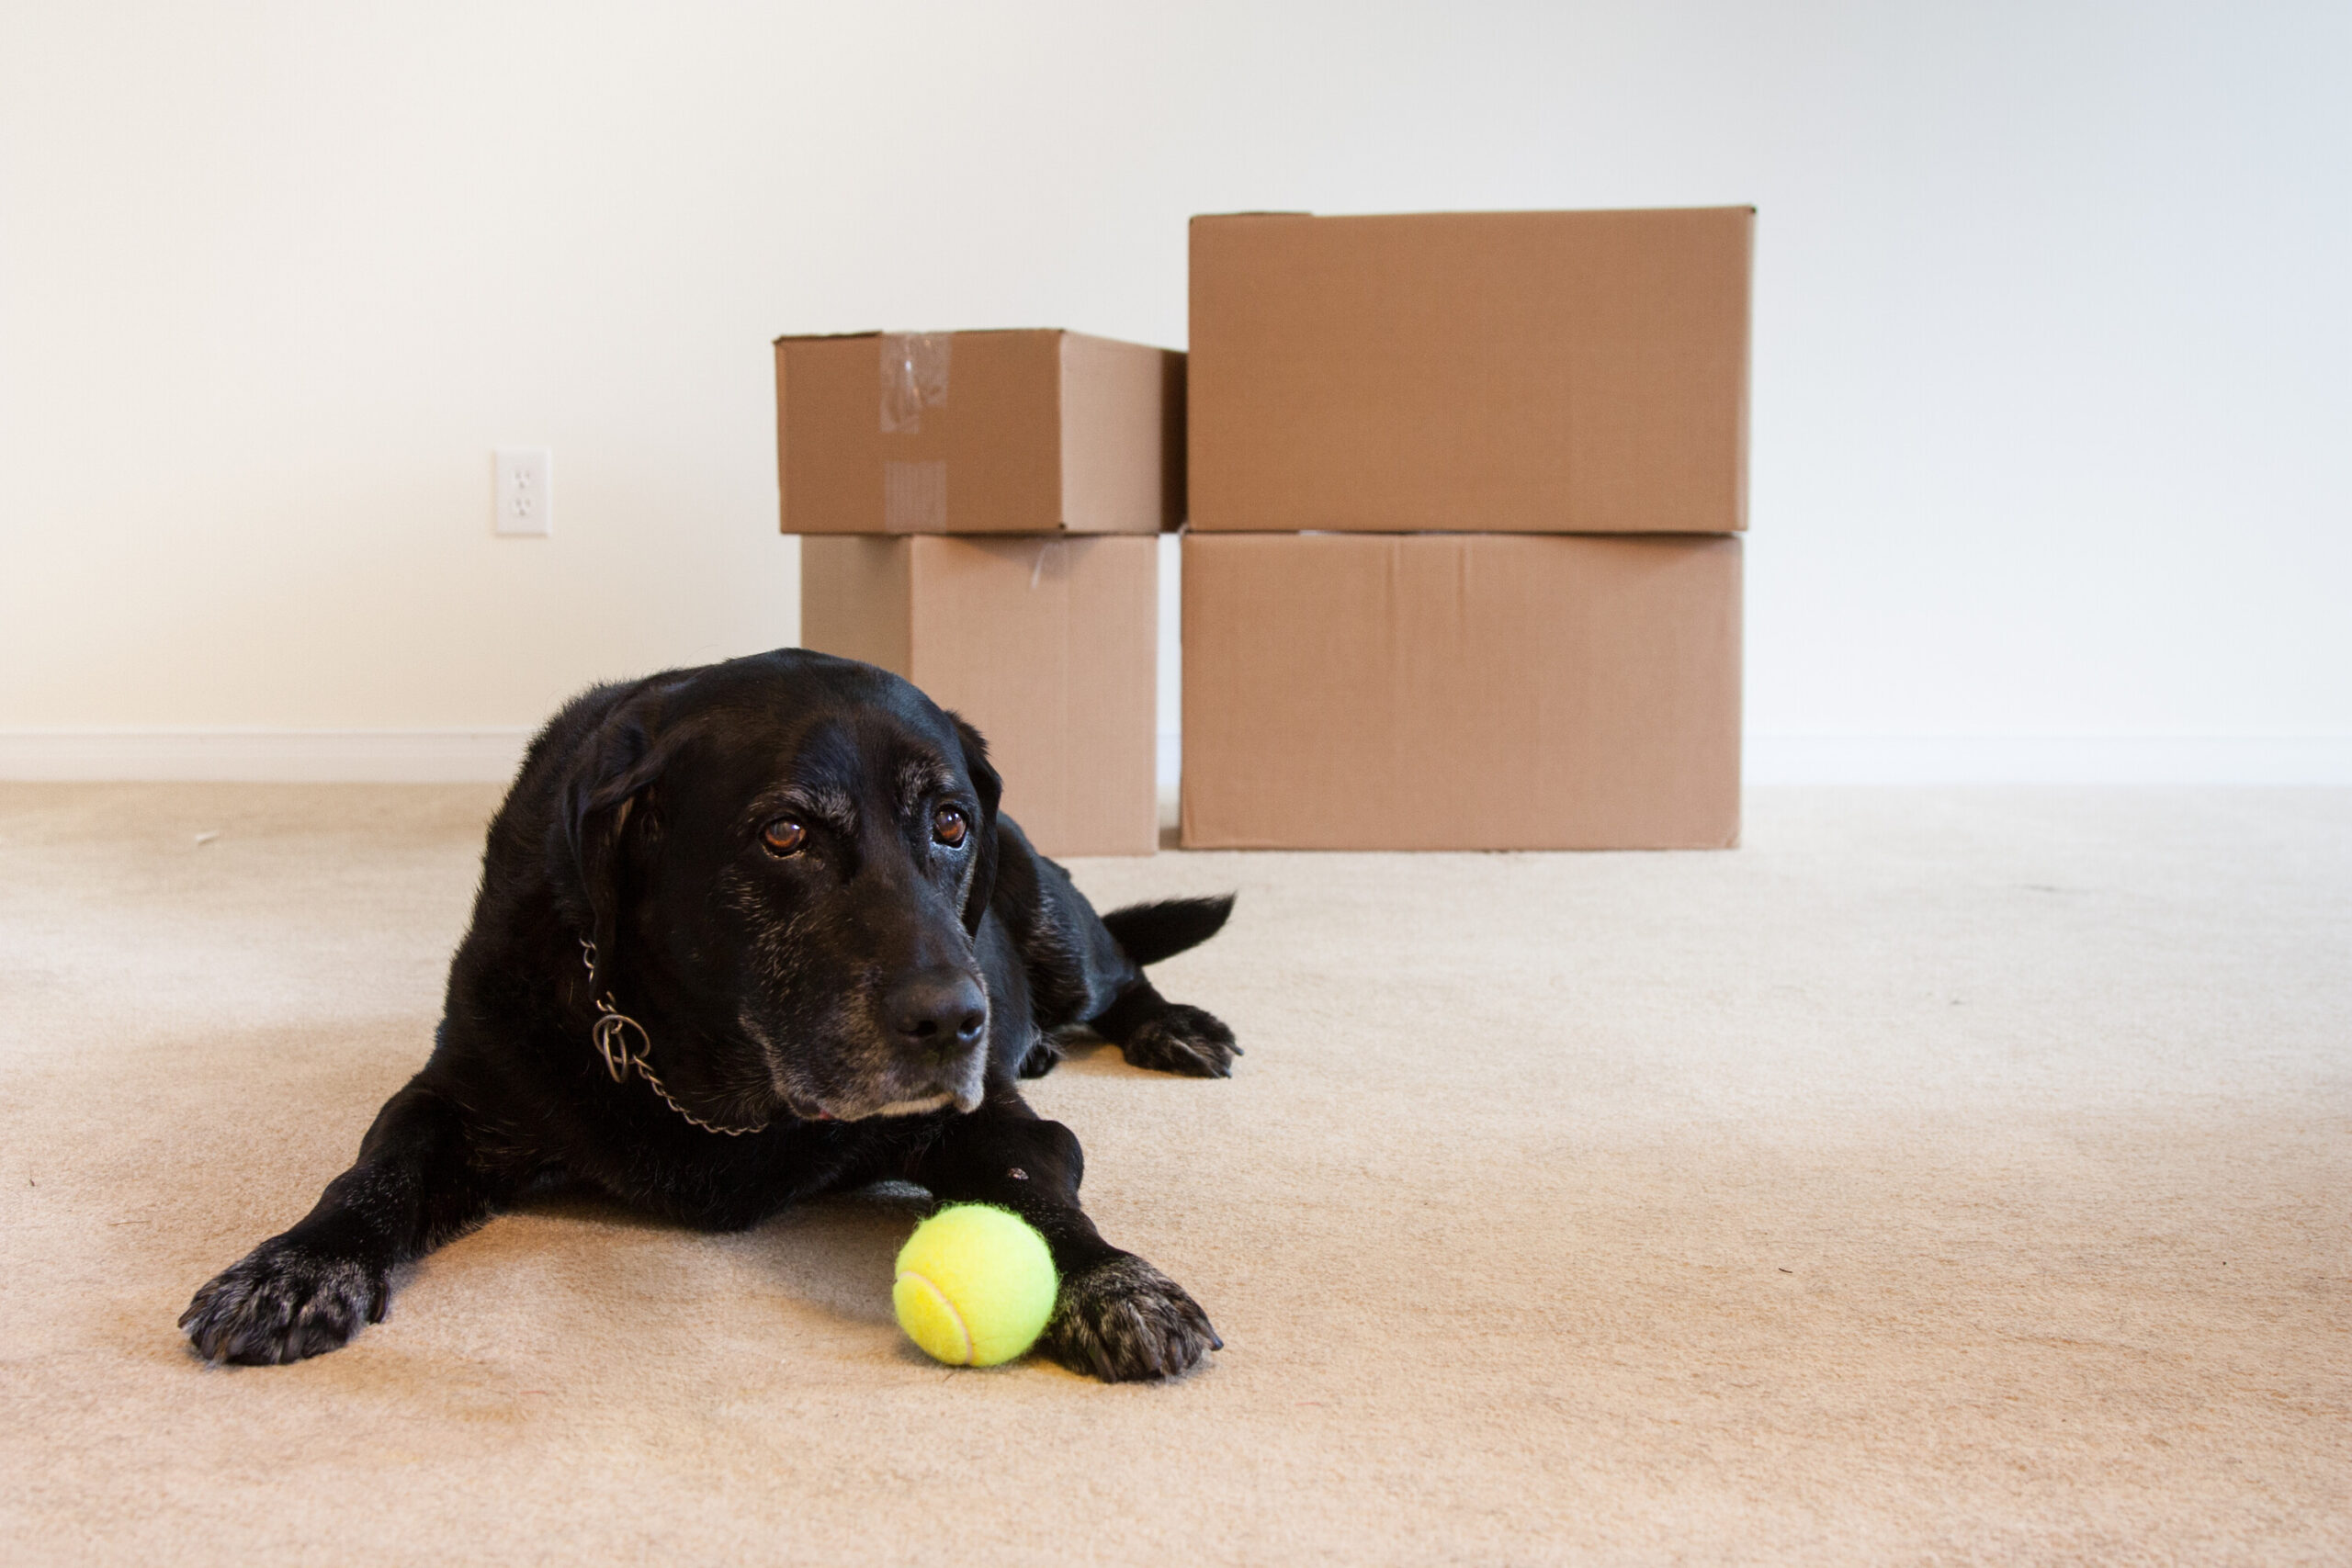 5 Ways to Keep Your Dog Occupied and Calm During a Move